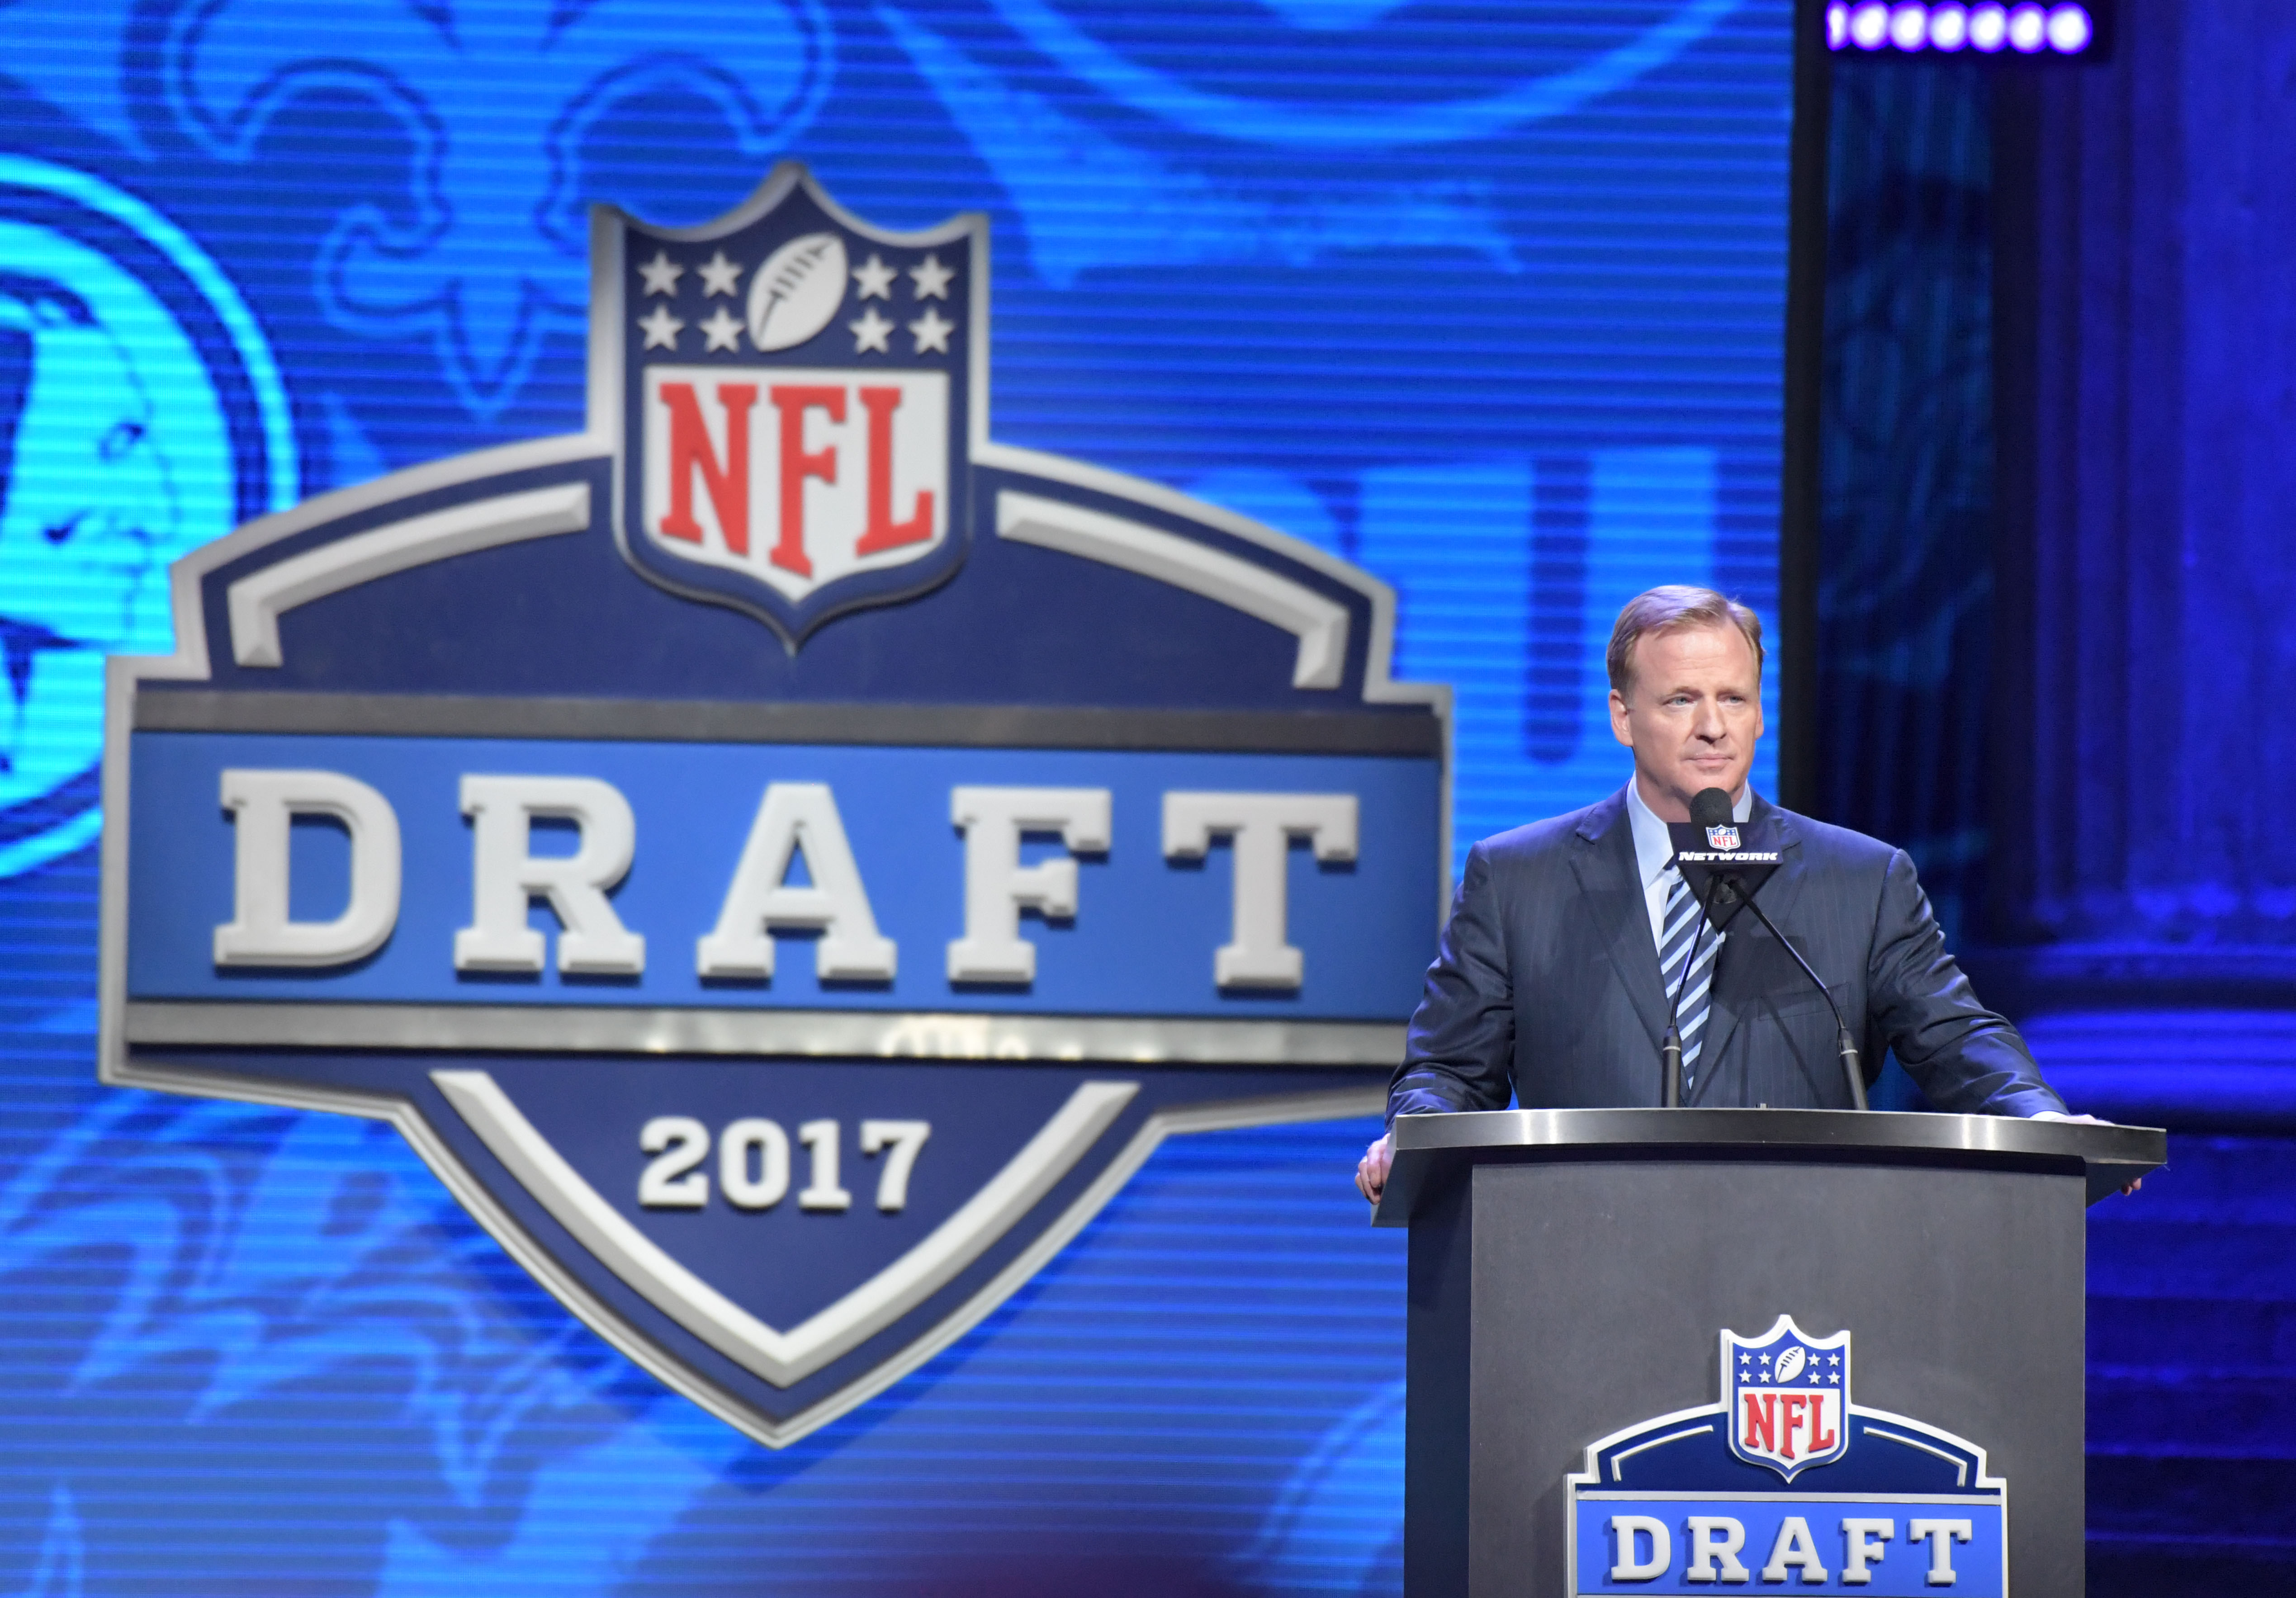 A recent history of the Big Ten's NFL Draft first round picks